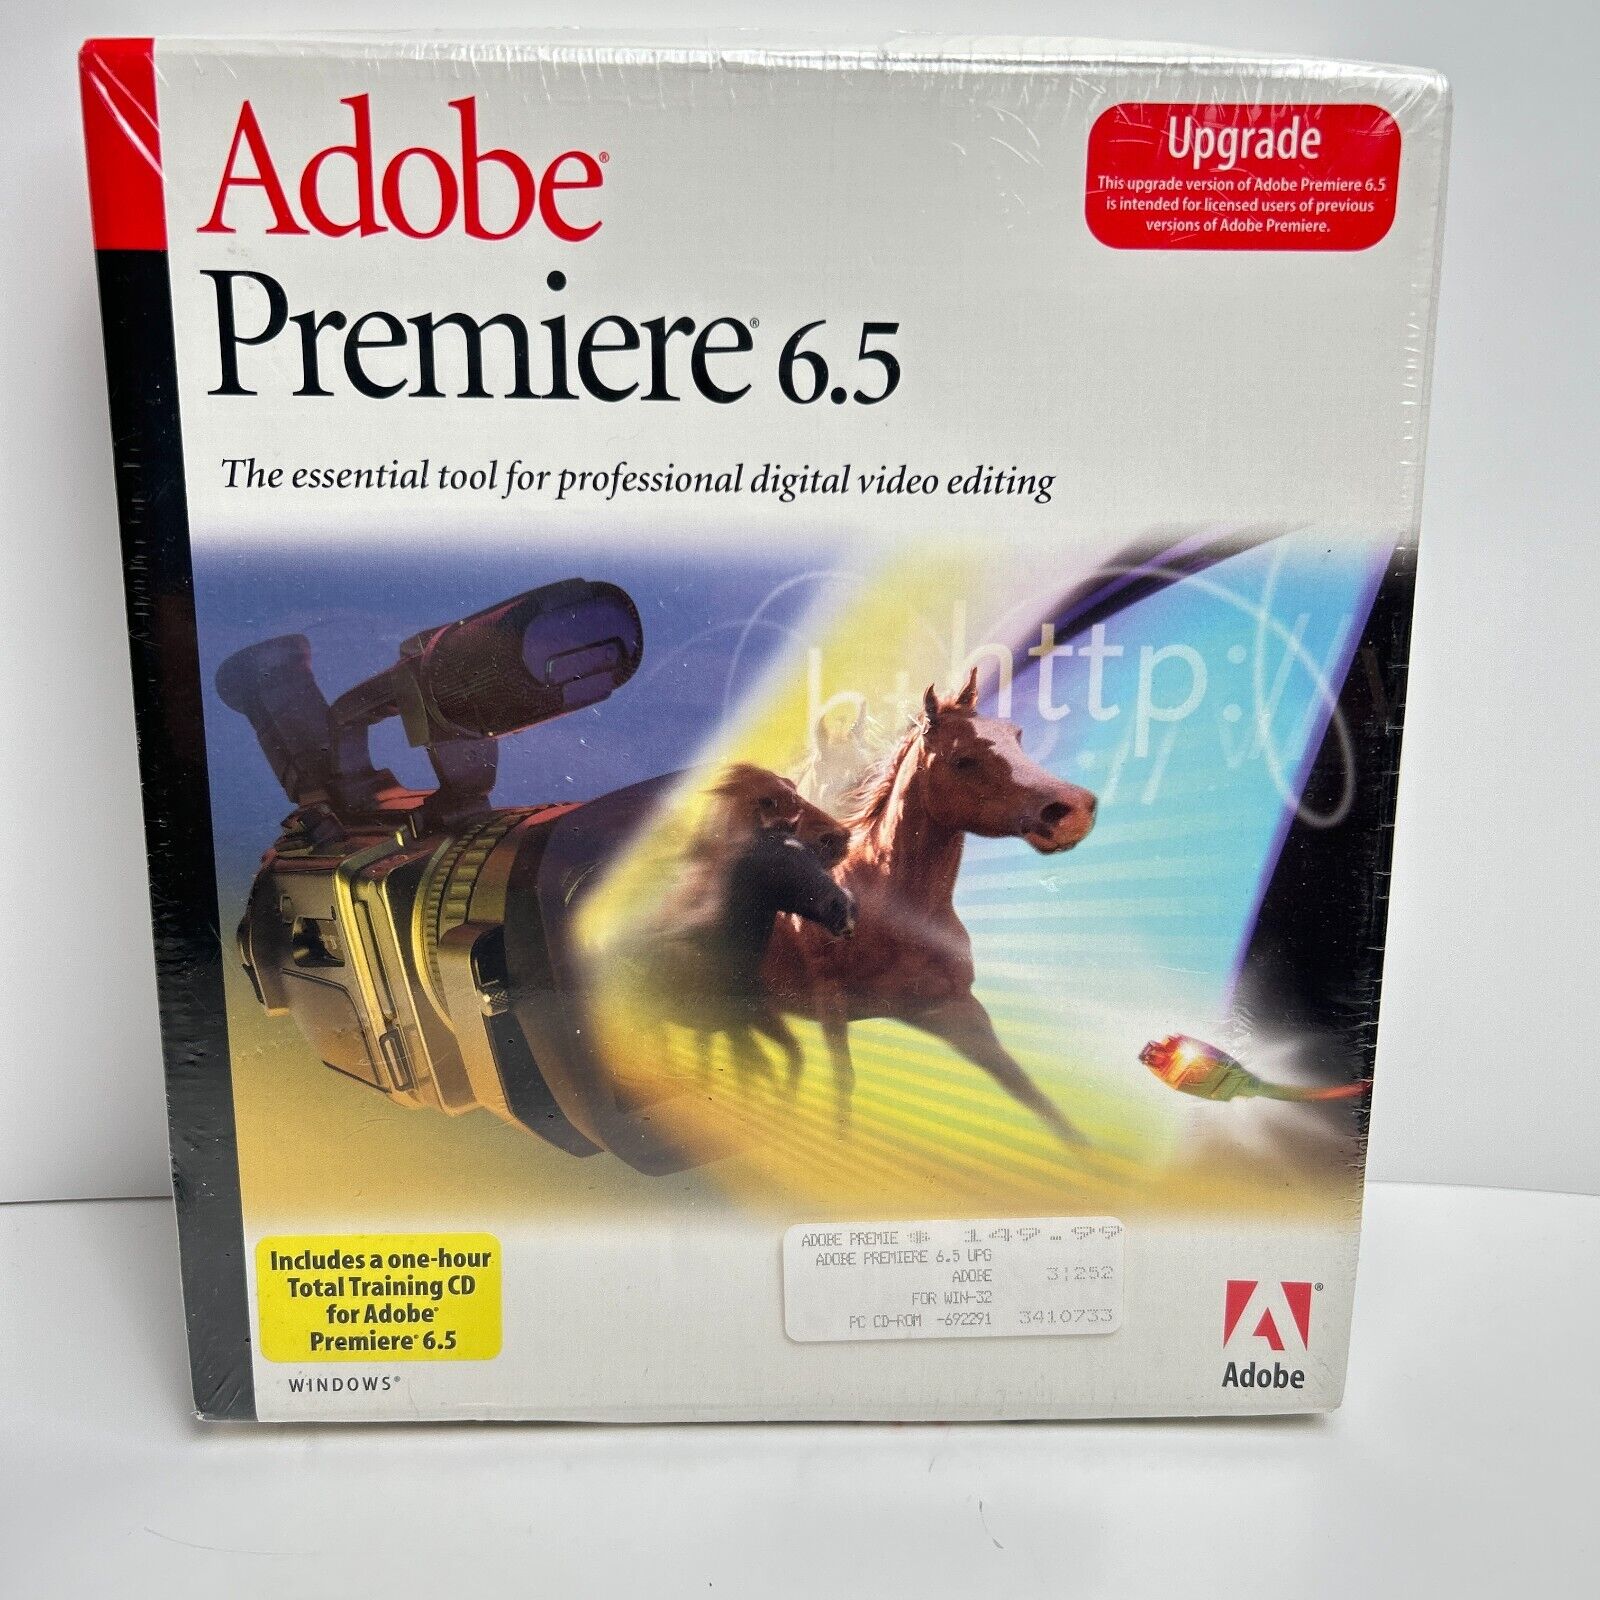 Adobe Premiere 6.5 Upgrade for Windows - Factory Sealed